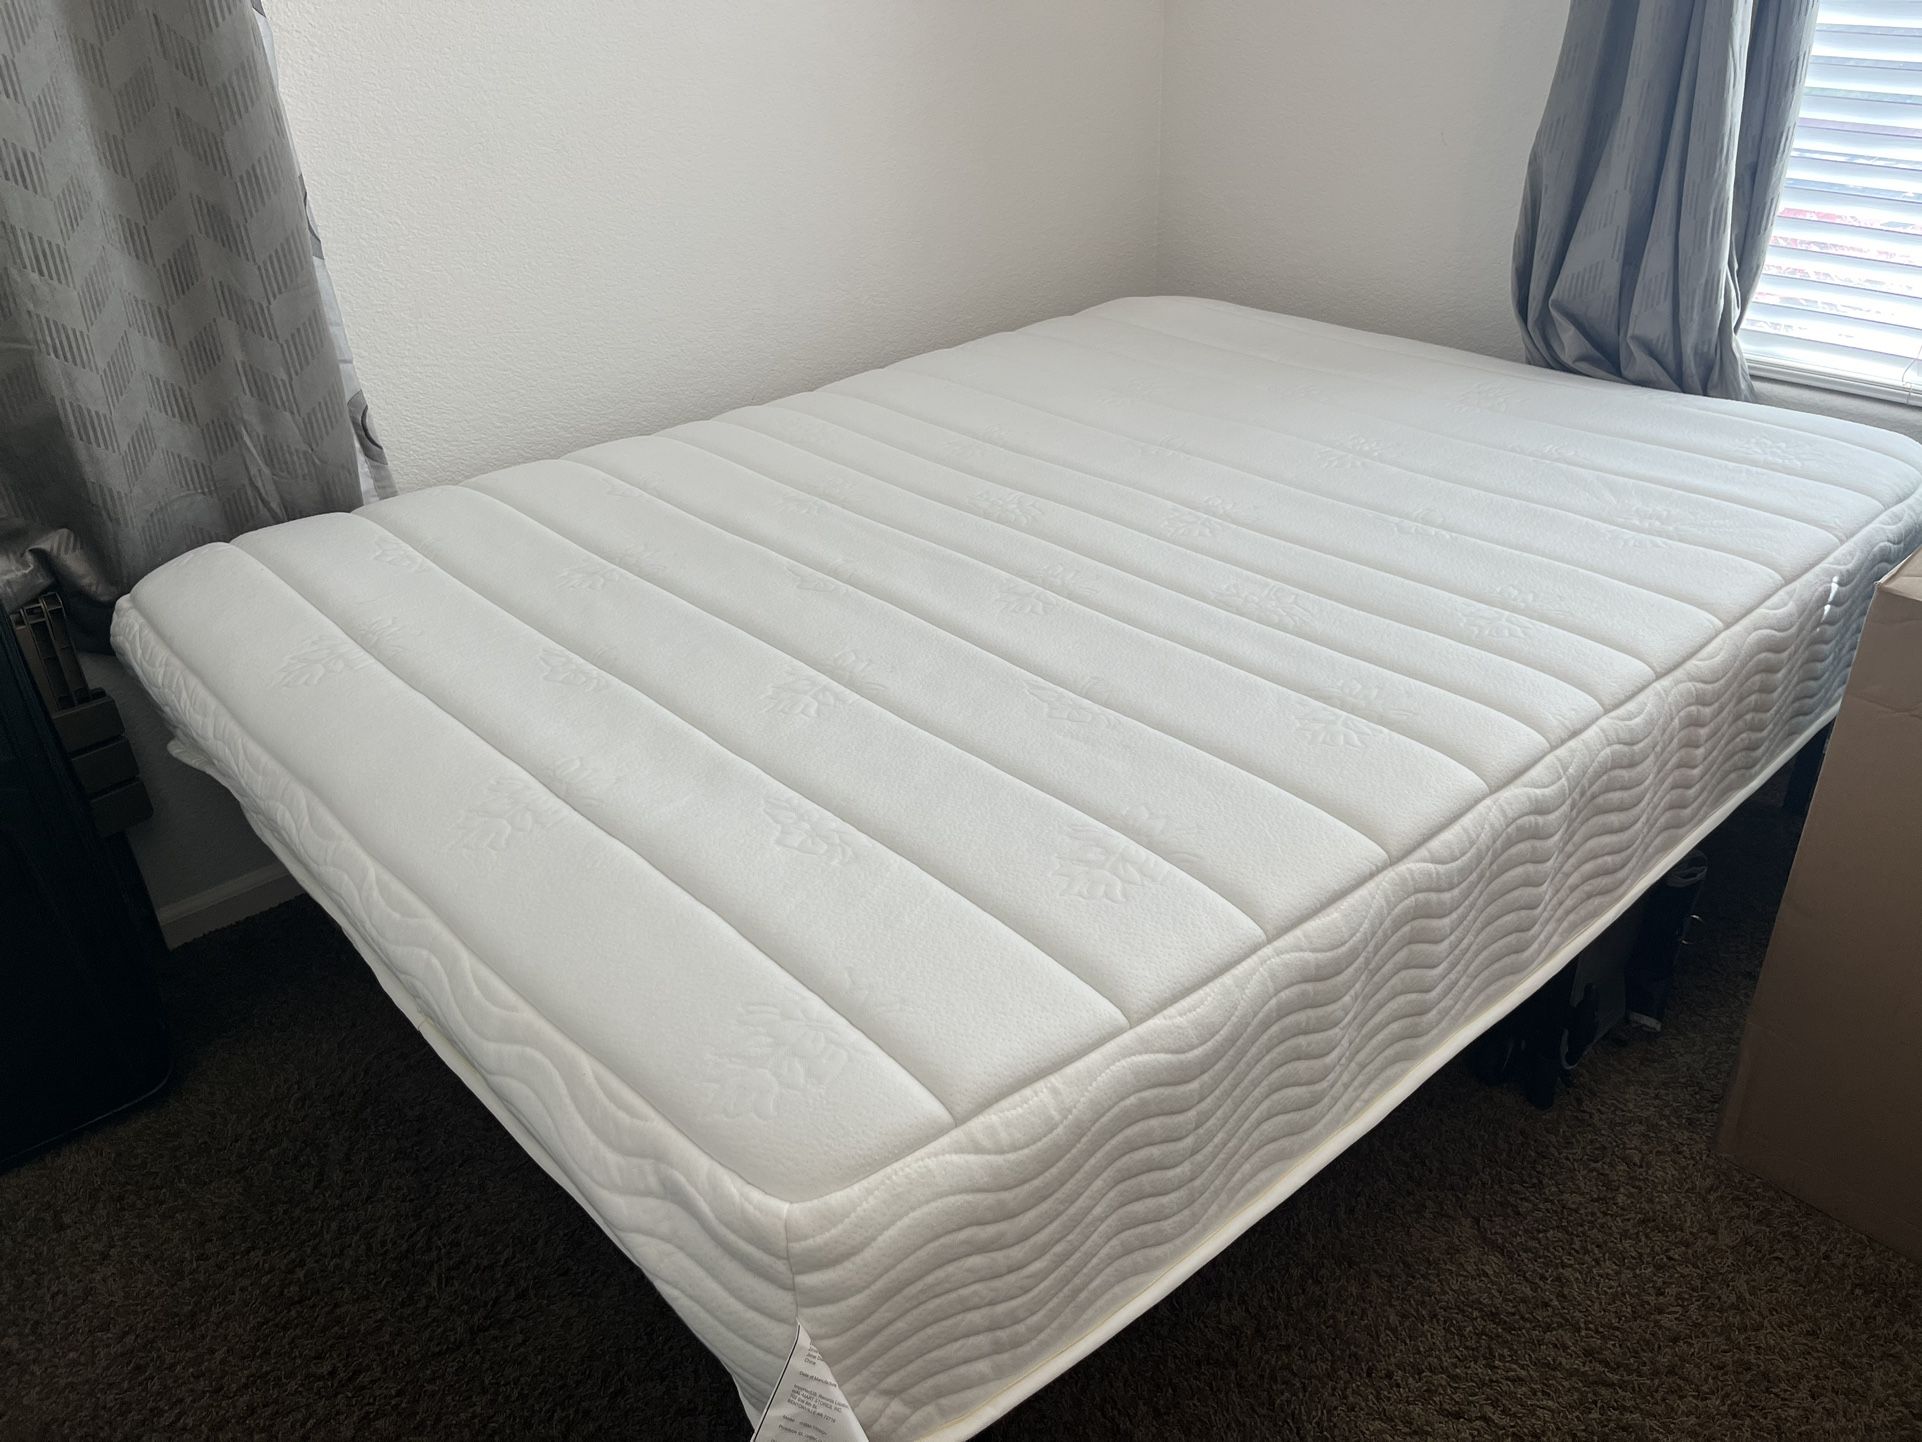 Mattress and Metal Bed Frame